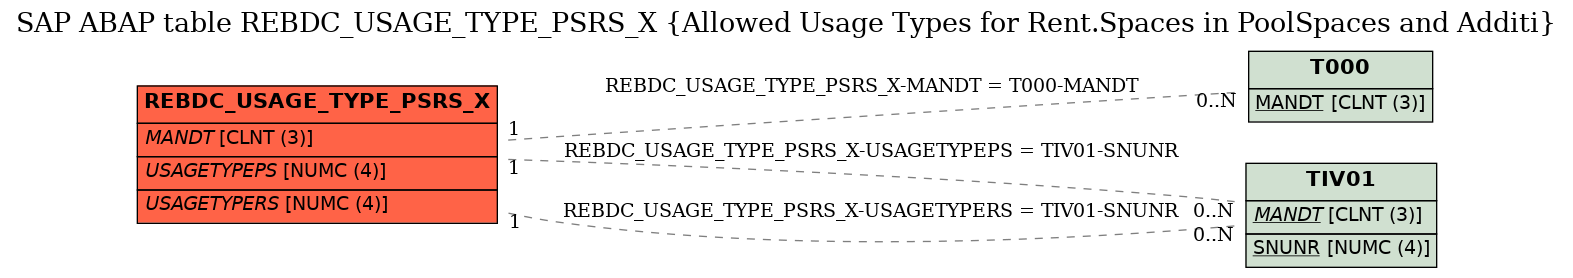 E-R Diagram for table REBDC_USAGE_TYPE_PSRS_X (Allowed Usage Types for Rent.Spaces in PoolSpaces and Additi)